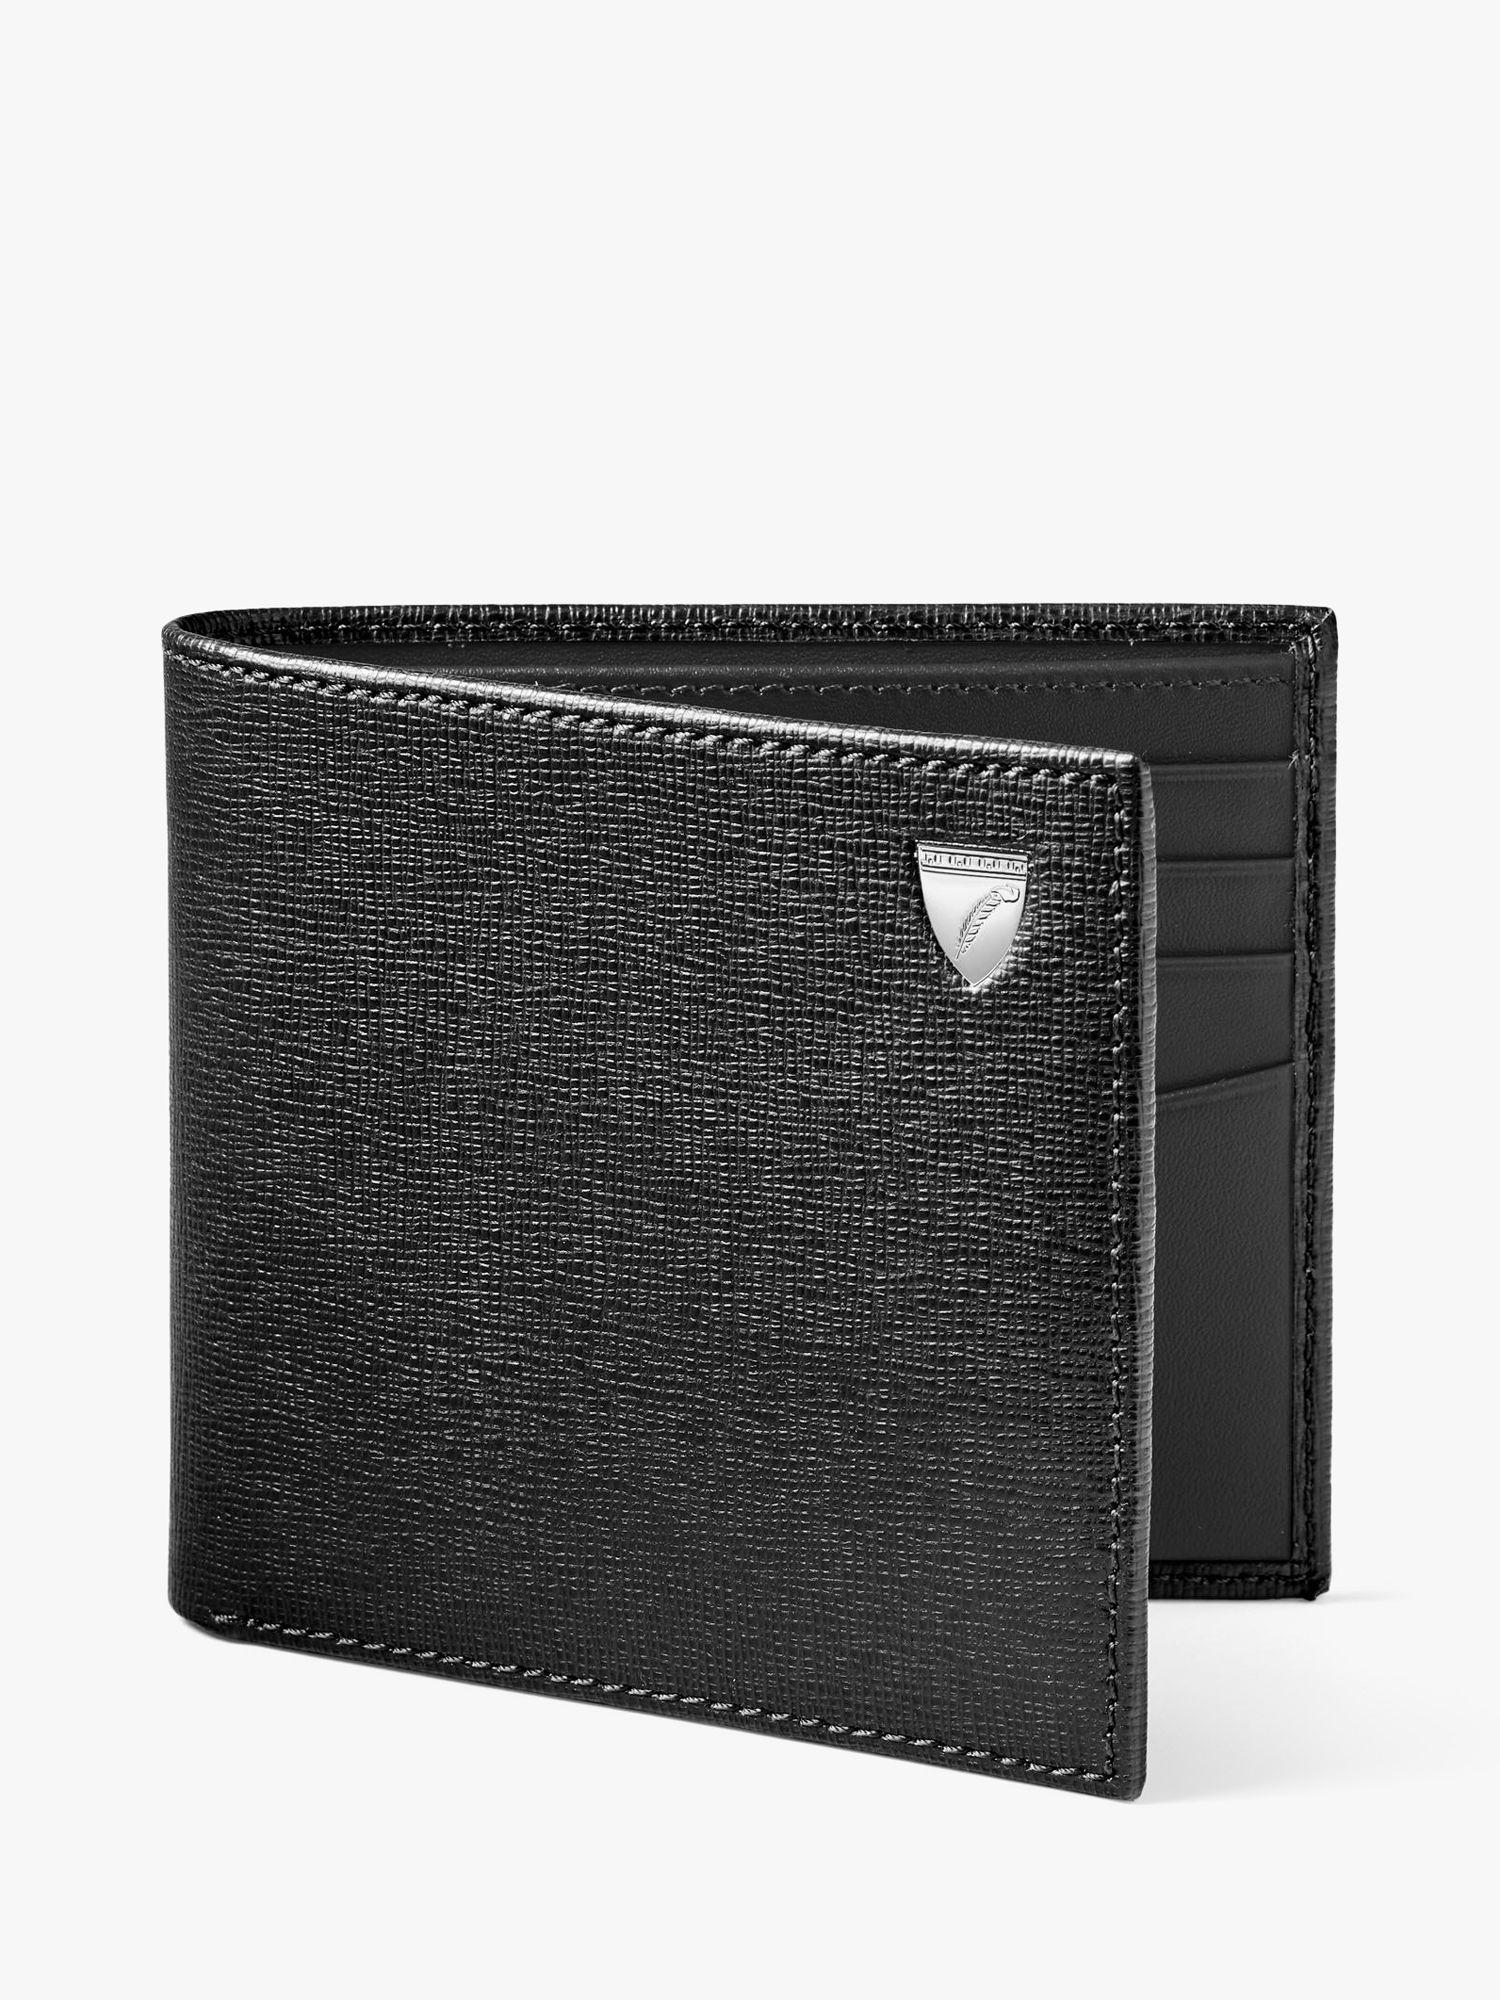 Aspinal of London 8 Card Billfold Saffiano Leather Wallet, Black at ...